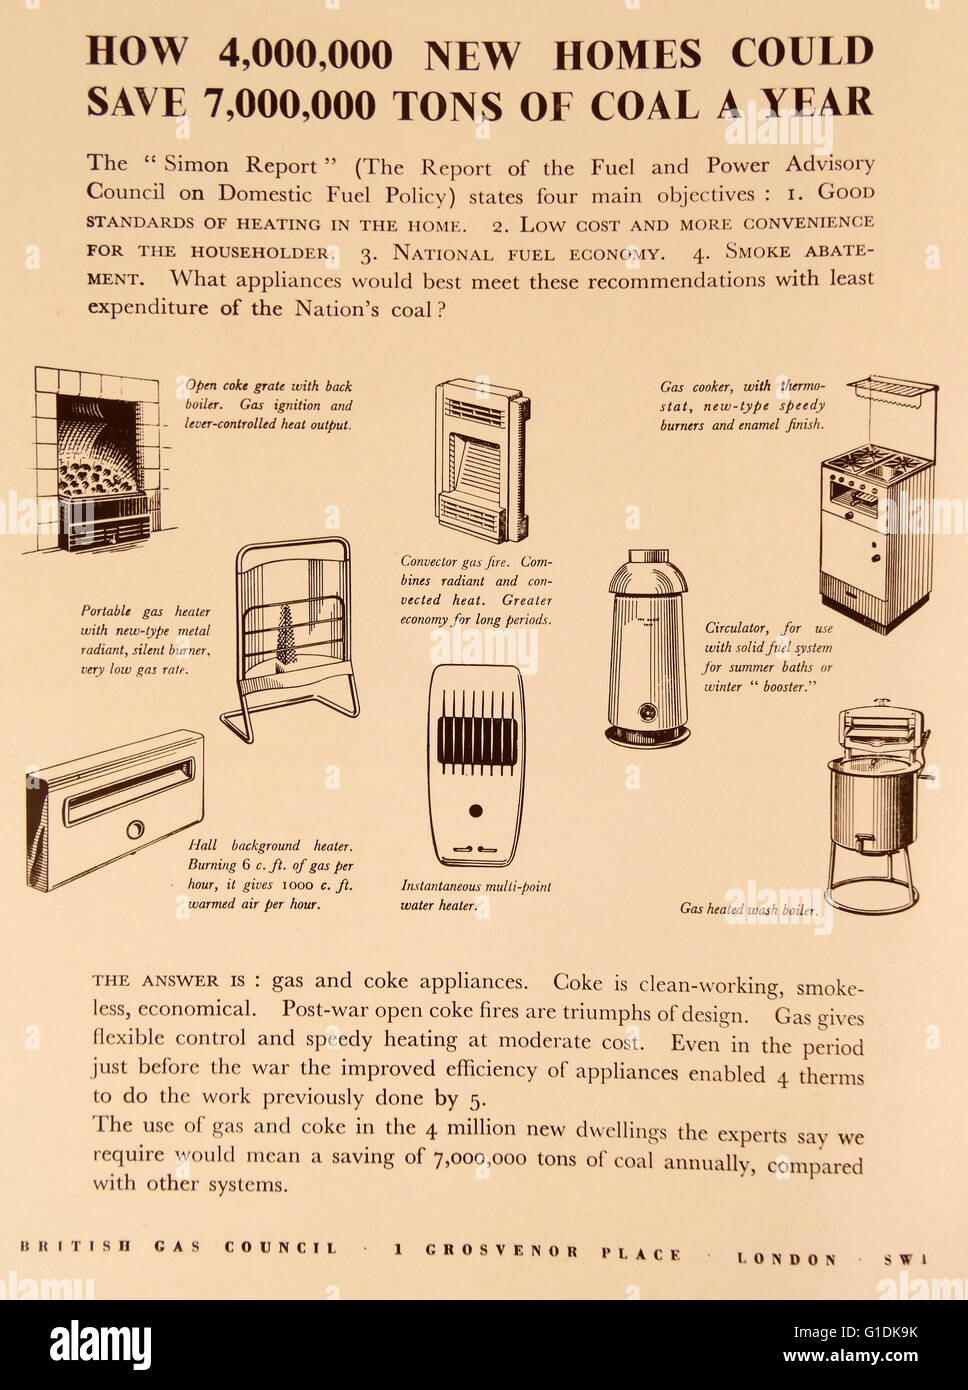 Advert for gas and coke appliances including stoves, fireplace and hot water storage. Dated 20th Century Stock Photo